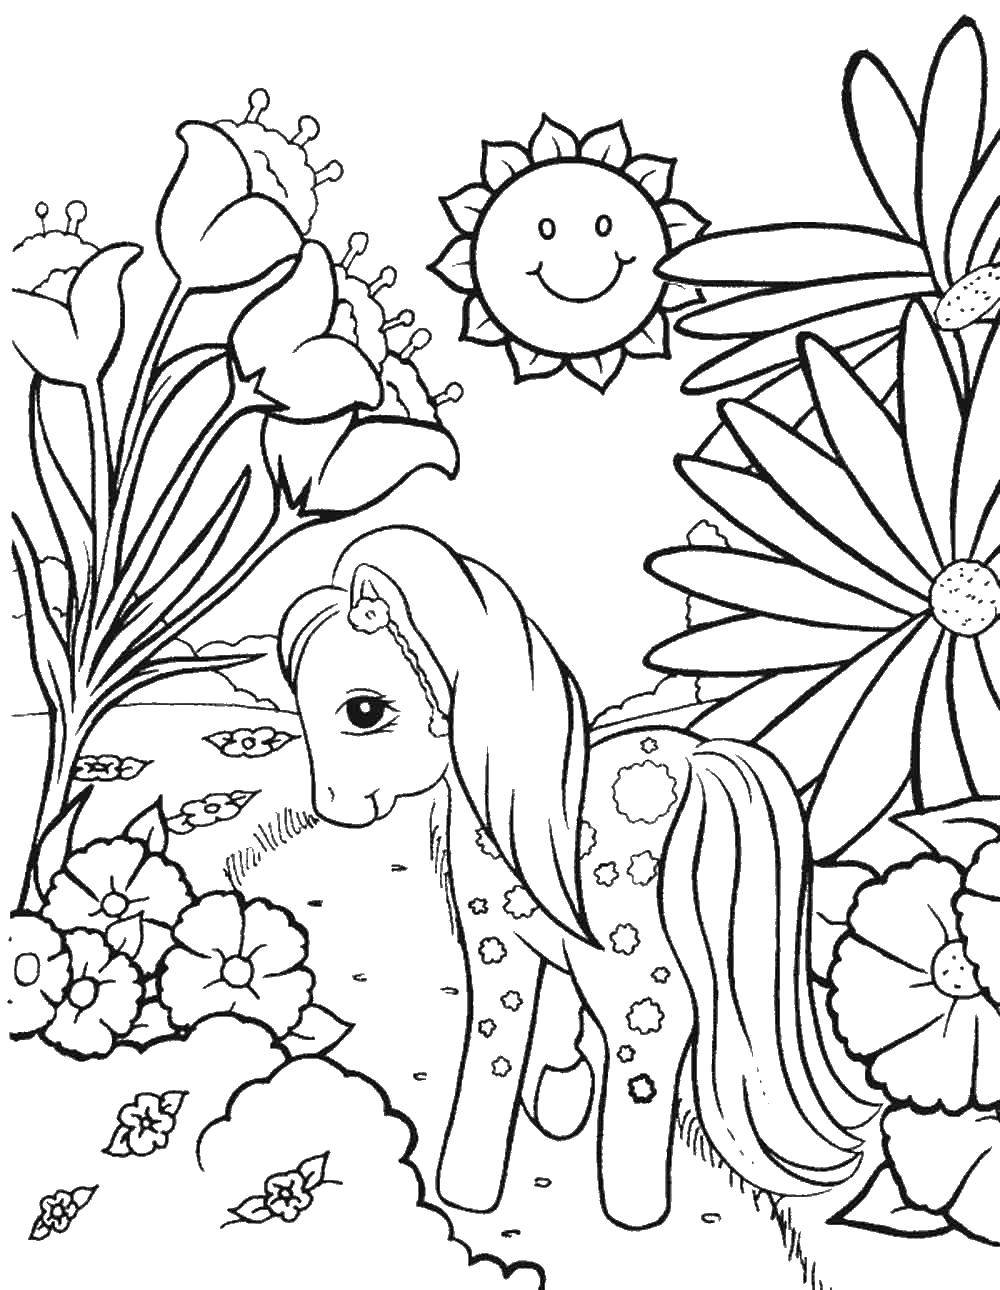 Coloring Pony among the flowers. Category Ponies. Tags:  pony, fairy tale, flowers, for girls.